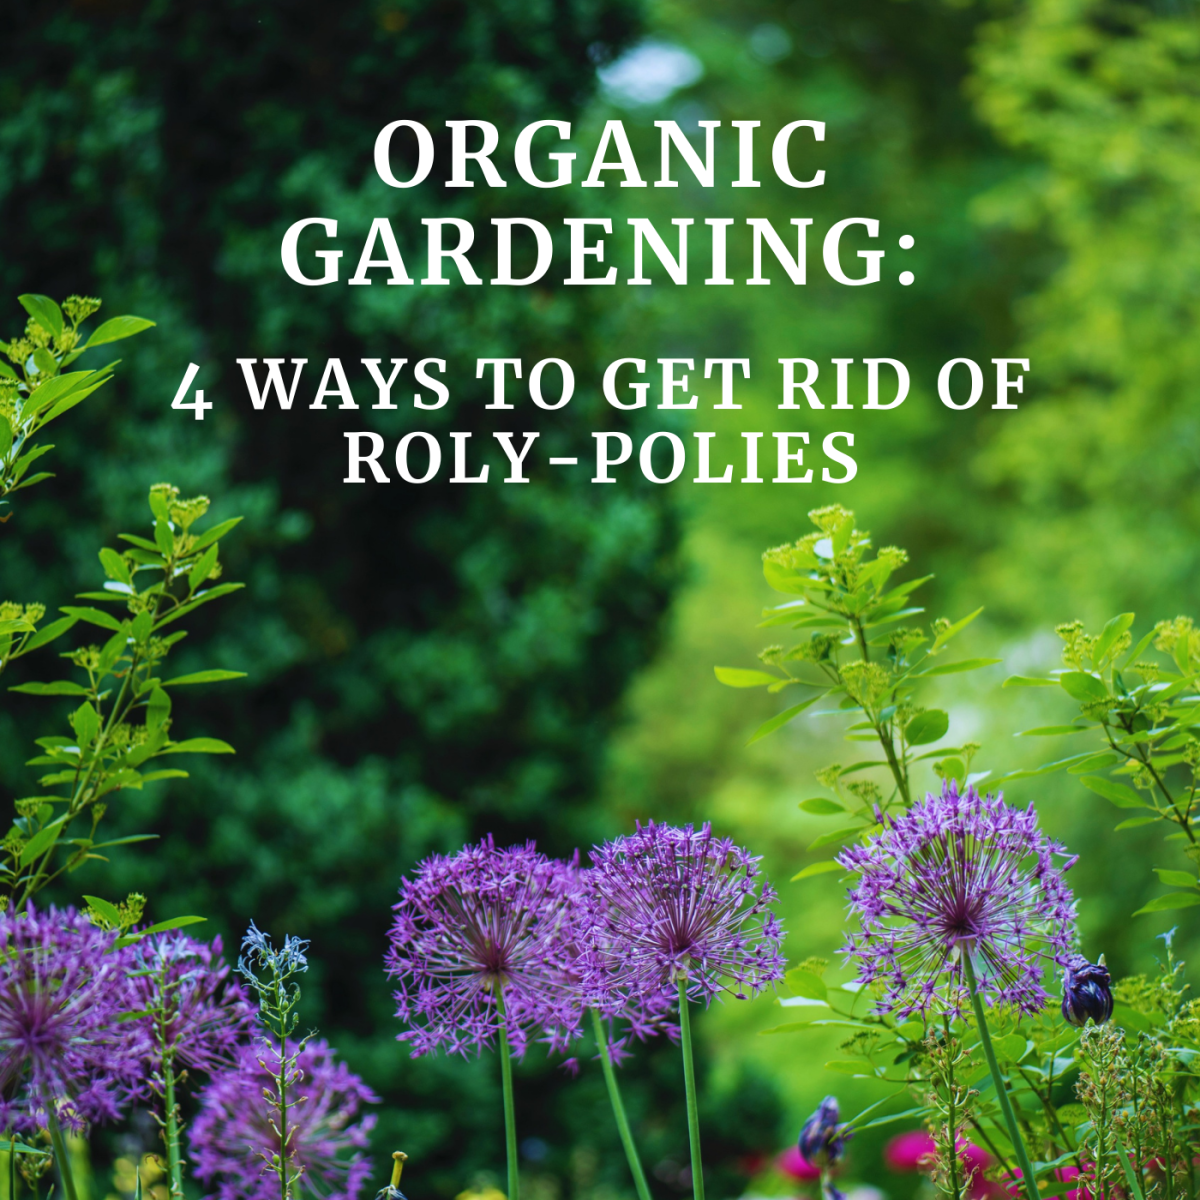 Organic Garden Pest Control: 4 Ways to Get Rid of Roly-Polies